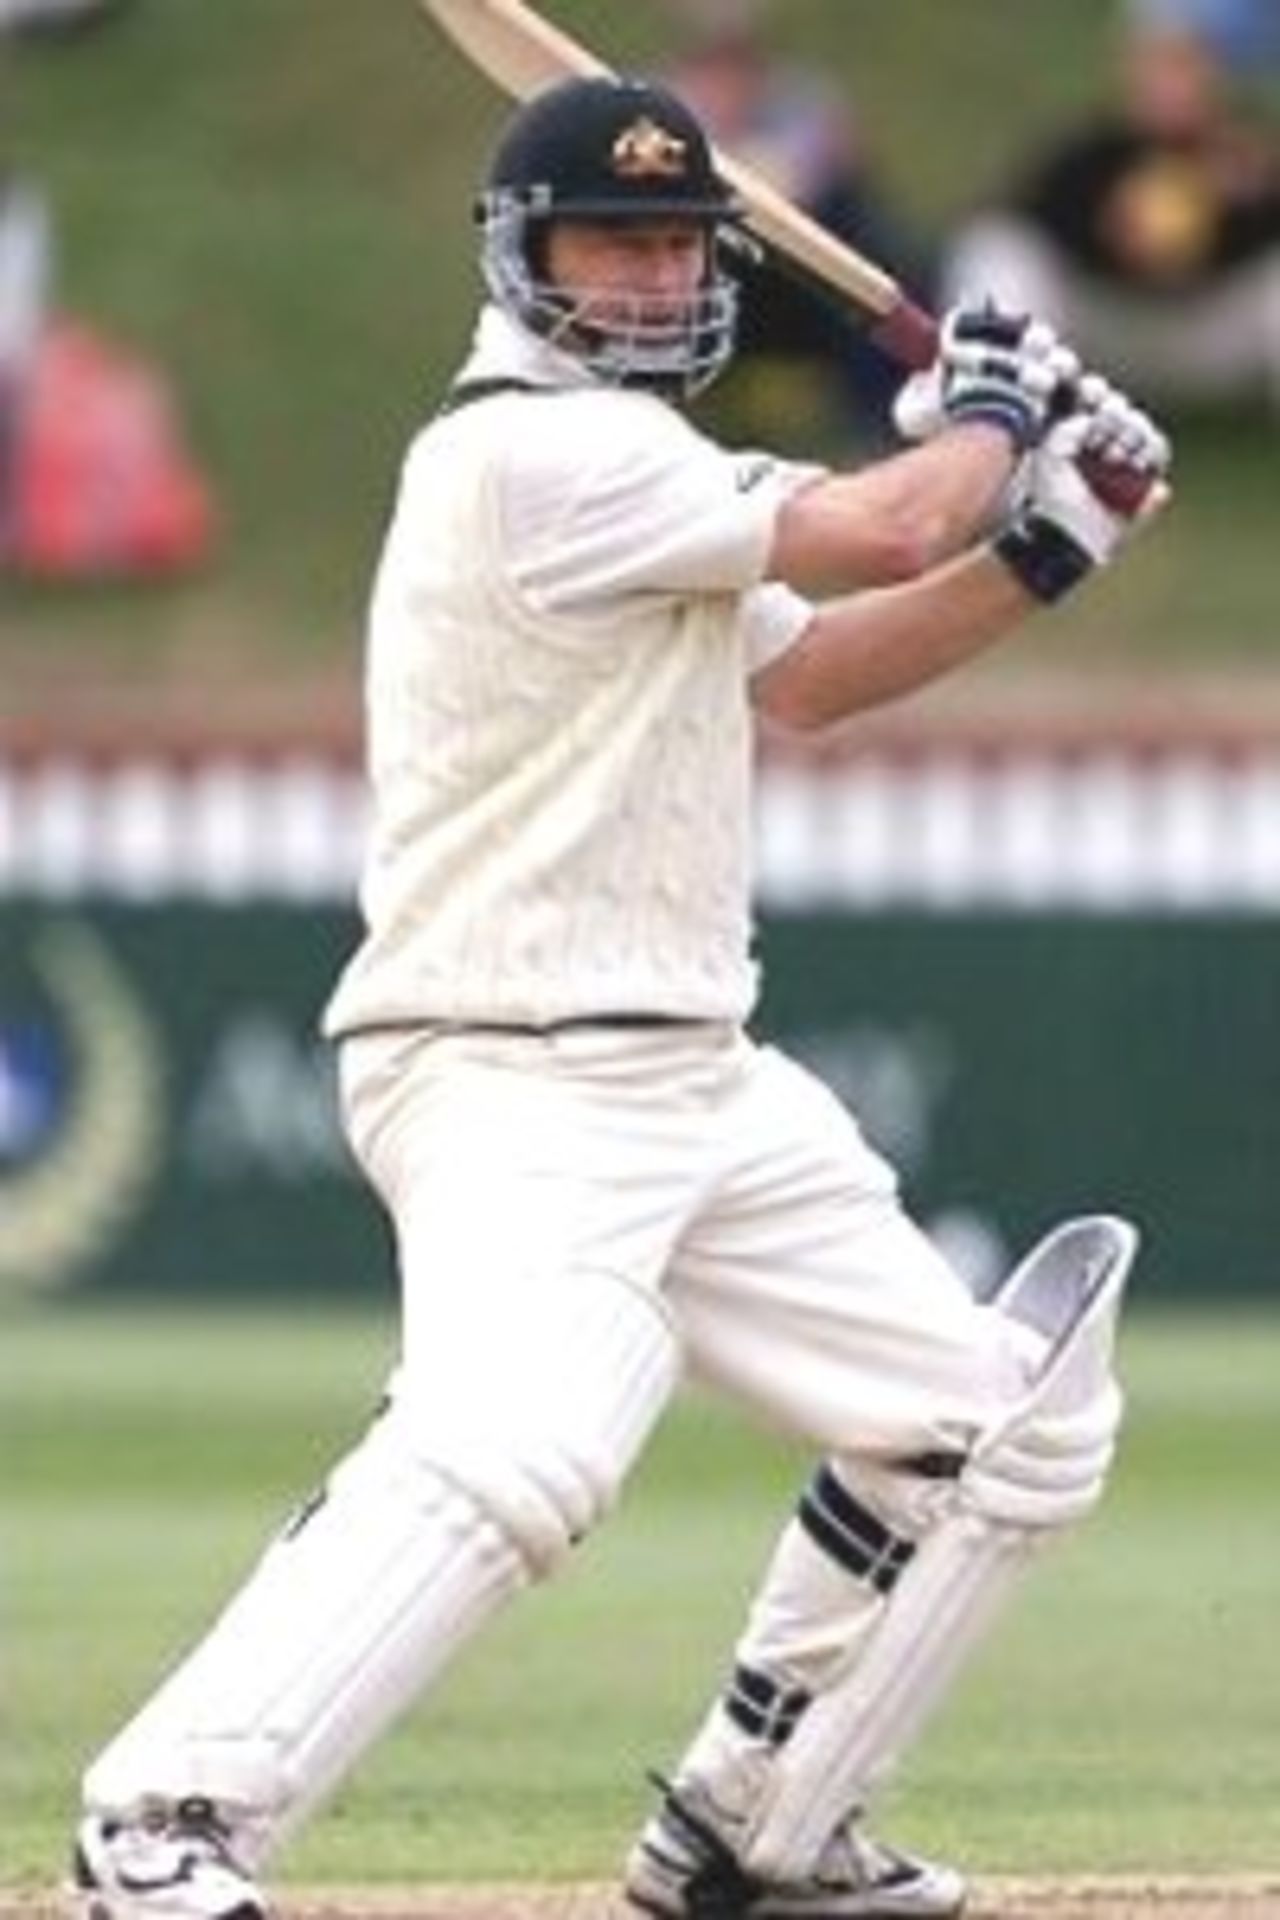 26 Mar 2000: Steve Waugh of Australia hits out on his way to 151 not out, becoming the first player to score 150 against all eight test playing nations, during day three of the second test between New Zealand and Australia at the Basin Reserve, Wellington, New Zealand.